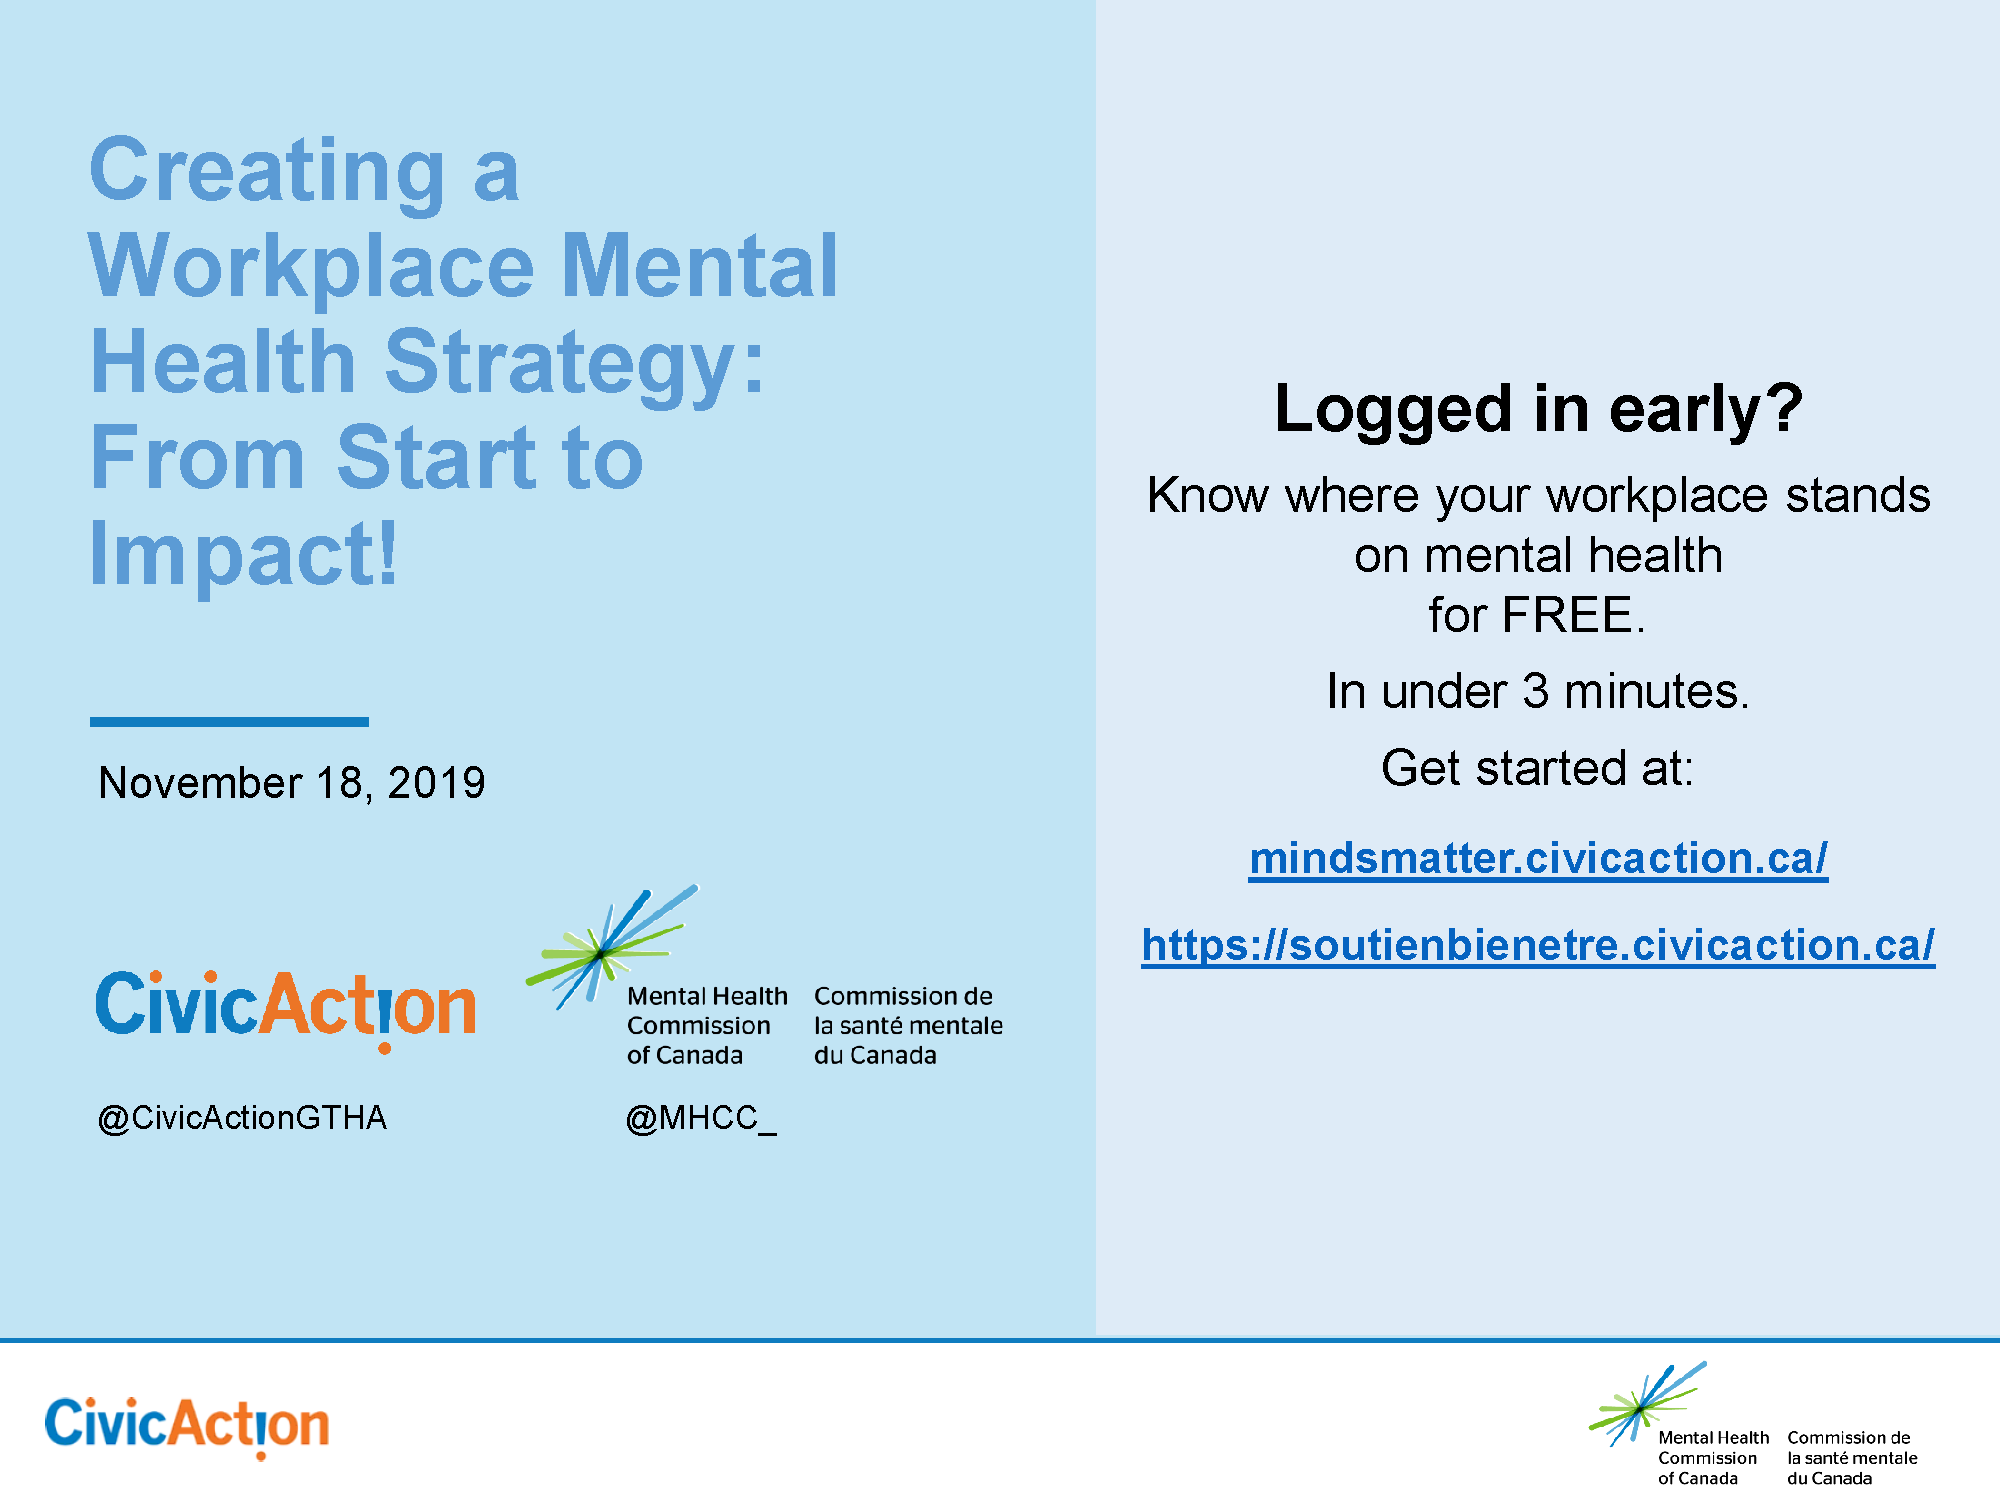 On a light blue background, we have text in left and right columns. On the left, we read the title of the webinar in darker blue text, “Creating a Workplace Mental Health Strategy: From Start to Impact!” Below, in black text, the date of the webinar: November 18, 2019. Beneath the date are the logos and Twitter handles for Civic Action (civic is in blue with orange points over the I’s; action is in orange, but the I is flipped upside-down to create an exclamation point. The I is blue and the point is orange. Their twitter handle is @CivicActionGHTA) and the Mental Health Commission of Canada (a spark made up of blue and green lines). In the right column, we read the text, “Logged in early? Know where your workplace stands on mental health for FREE. In under 3 minutes. Get started at: mindsmatter.civicaction.ca/ https://soutienbienetre.civicaction.ca/” Beneath both columns along the bottom of the image is a white band. The Civic Action logo is repeated in the bottom right corner. The MHCC logo is repeated in the bottom right corner.